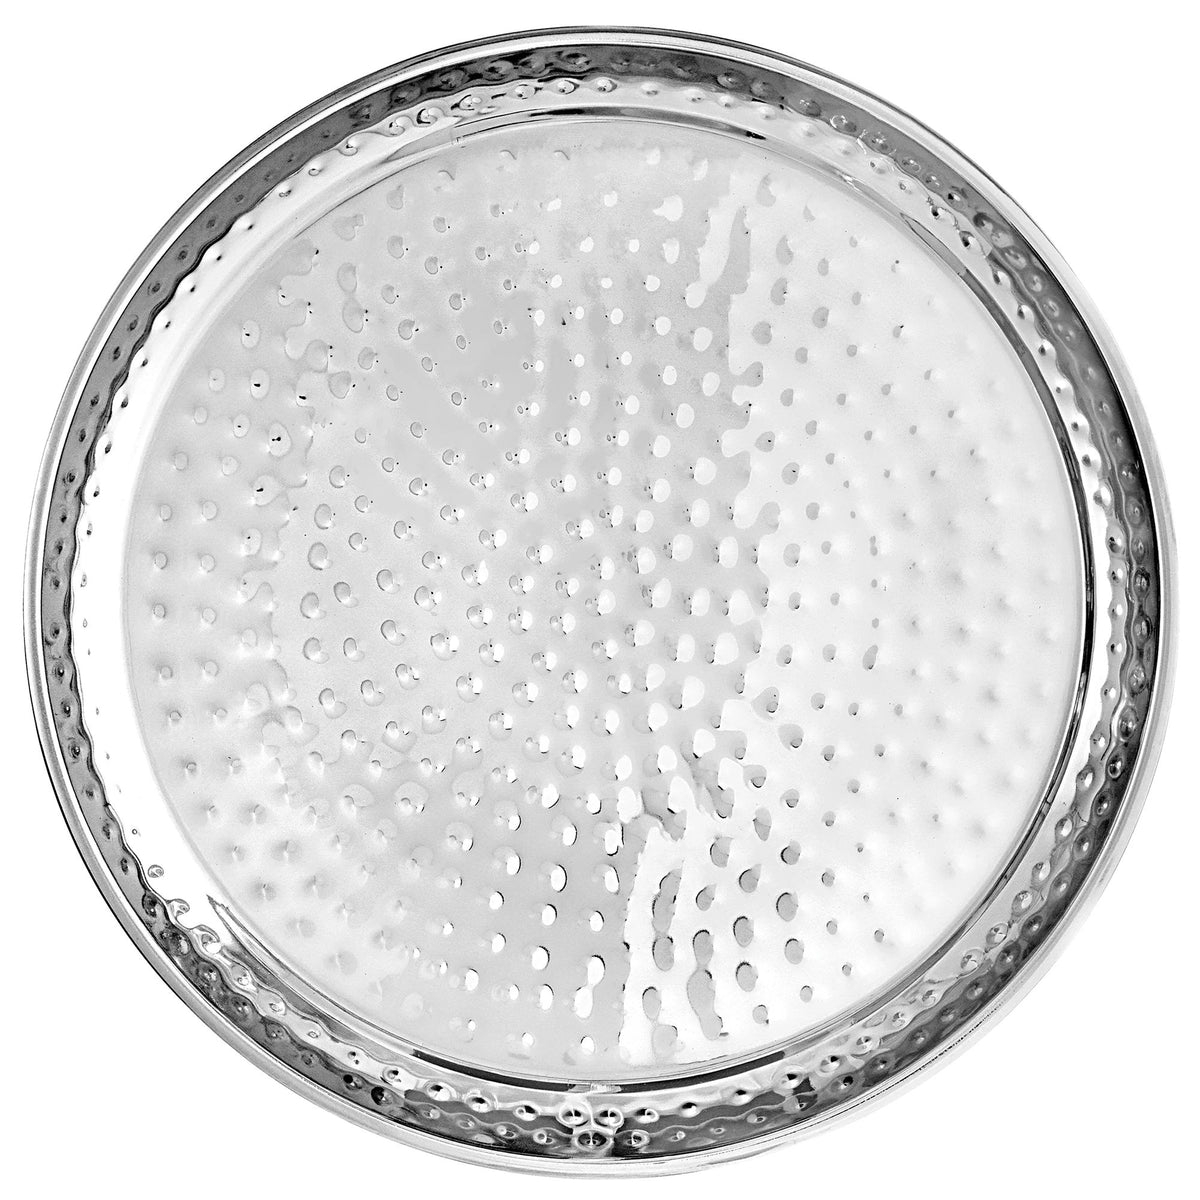 Hammered Stainless Steel Silver 15 1/2" Tray